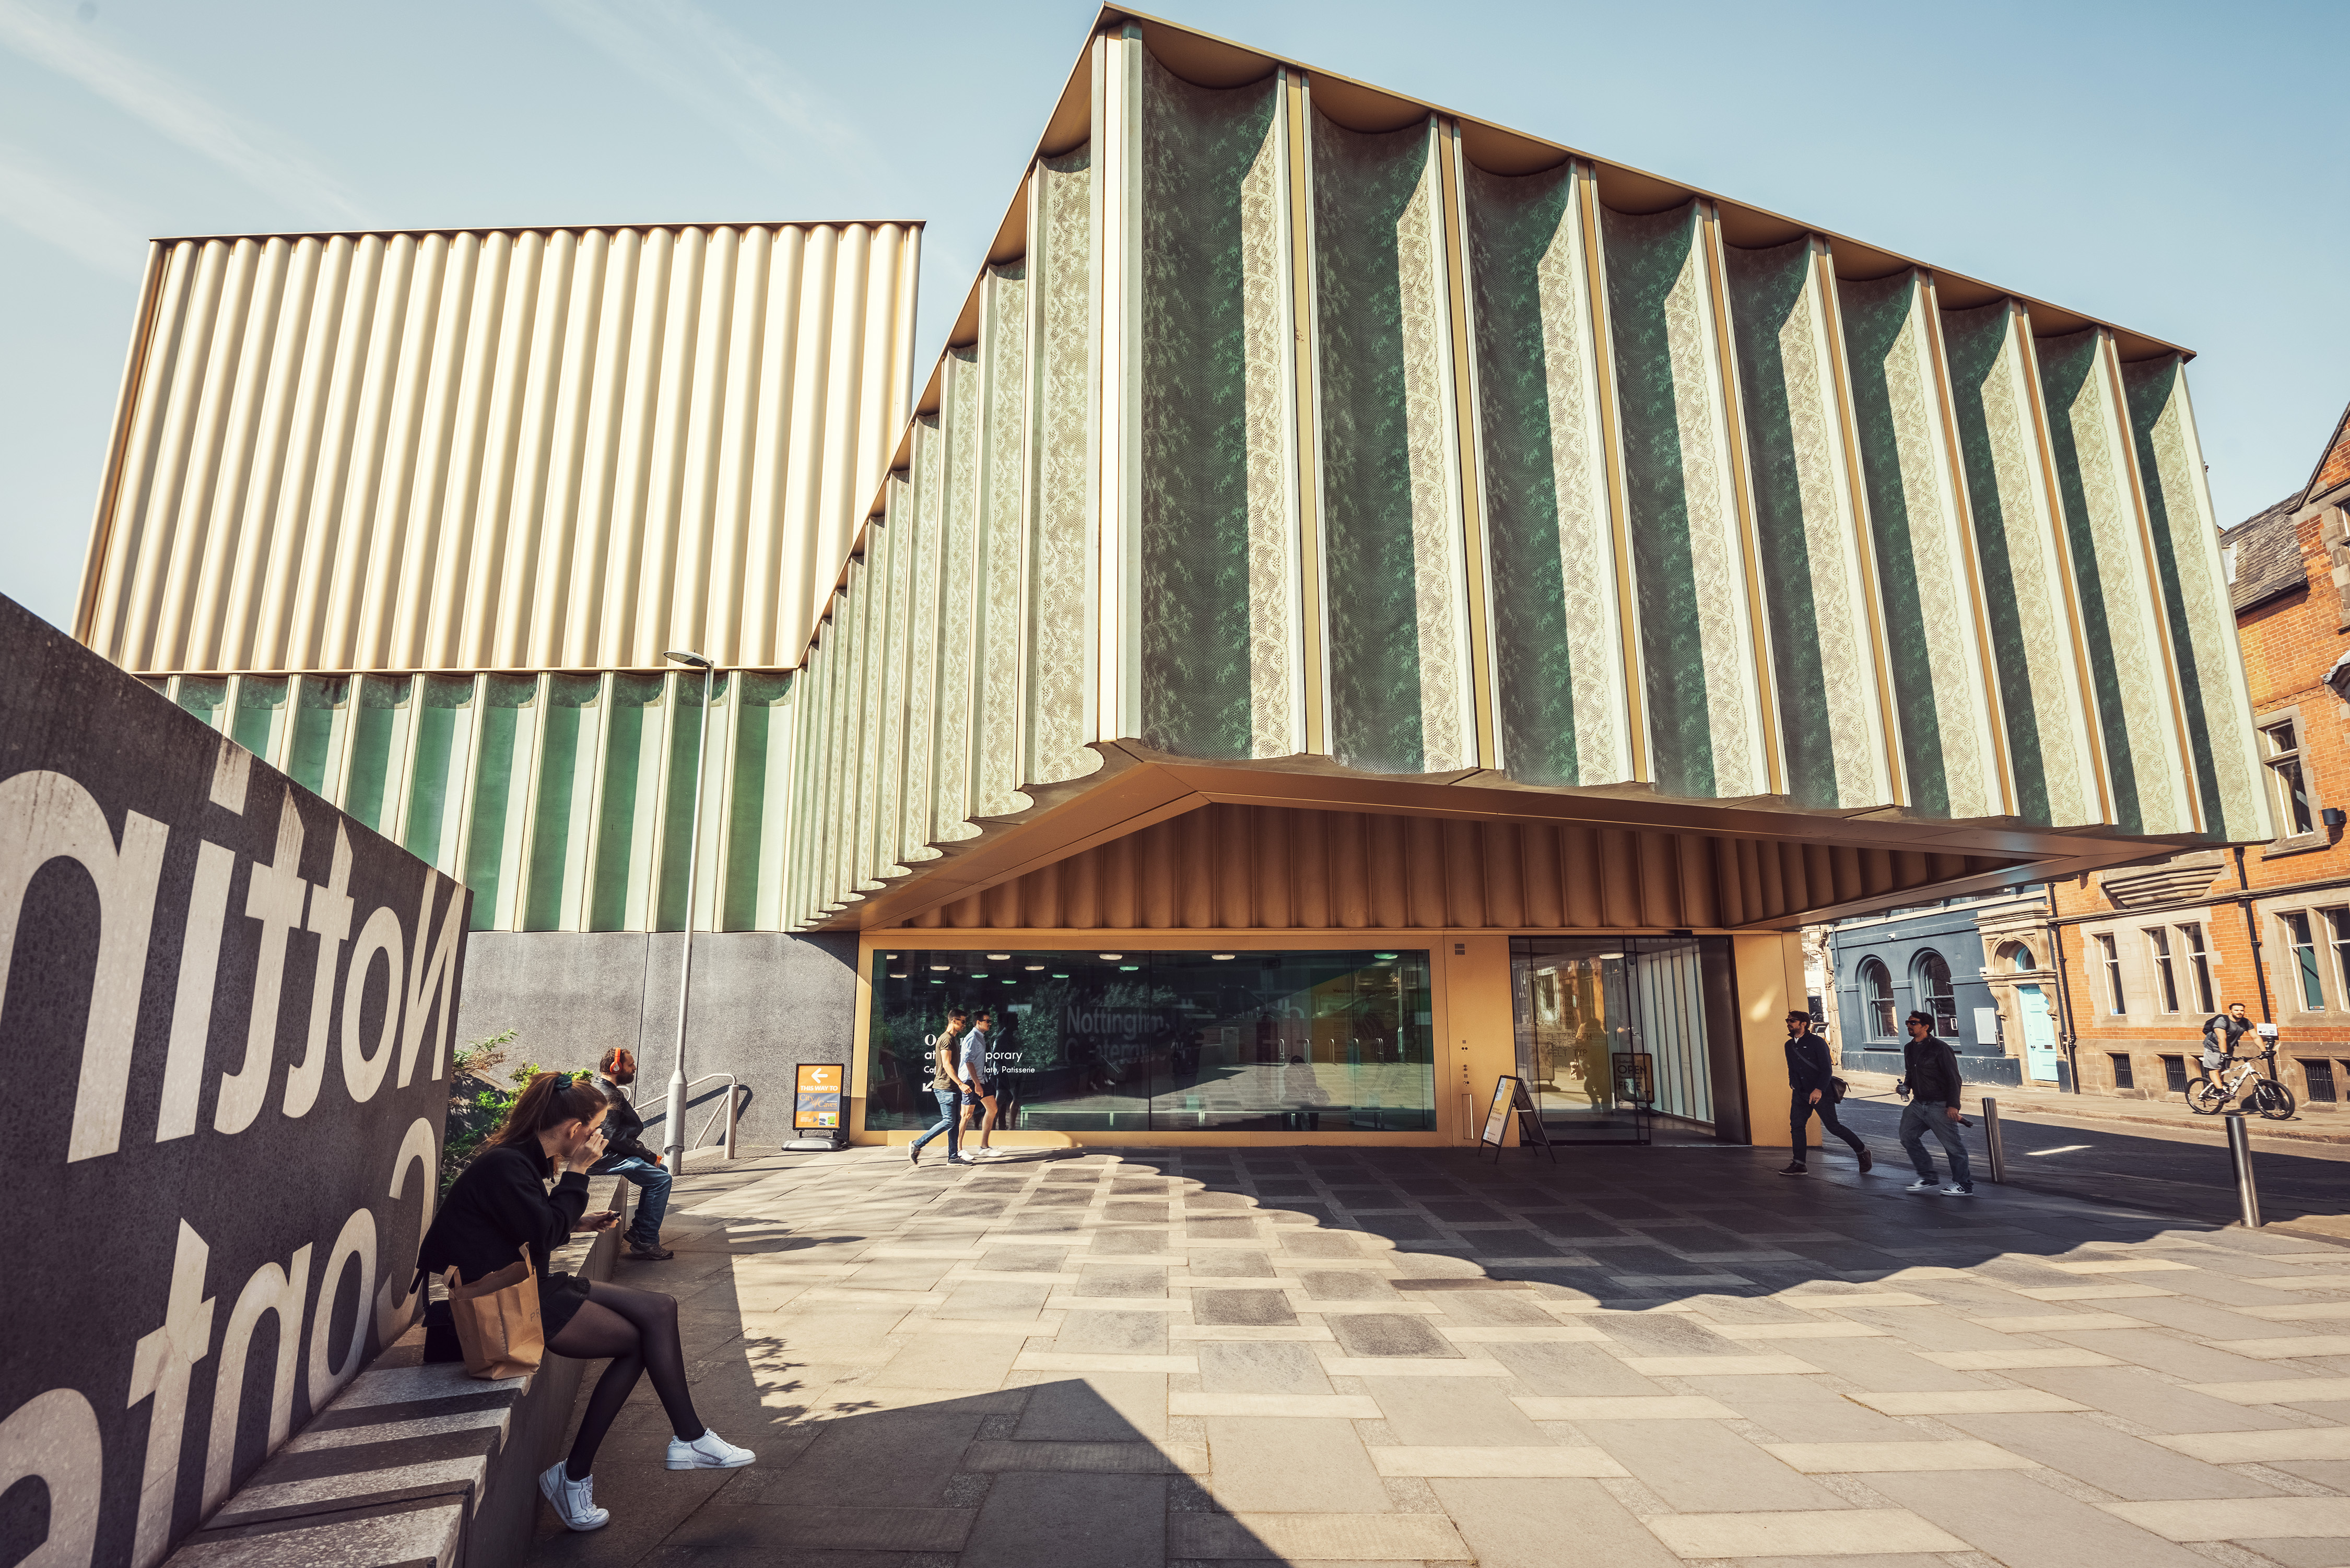 The entrance to Nottingham Contemporary's iconic angular green and gold building, with visitors sitting and walking outside.